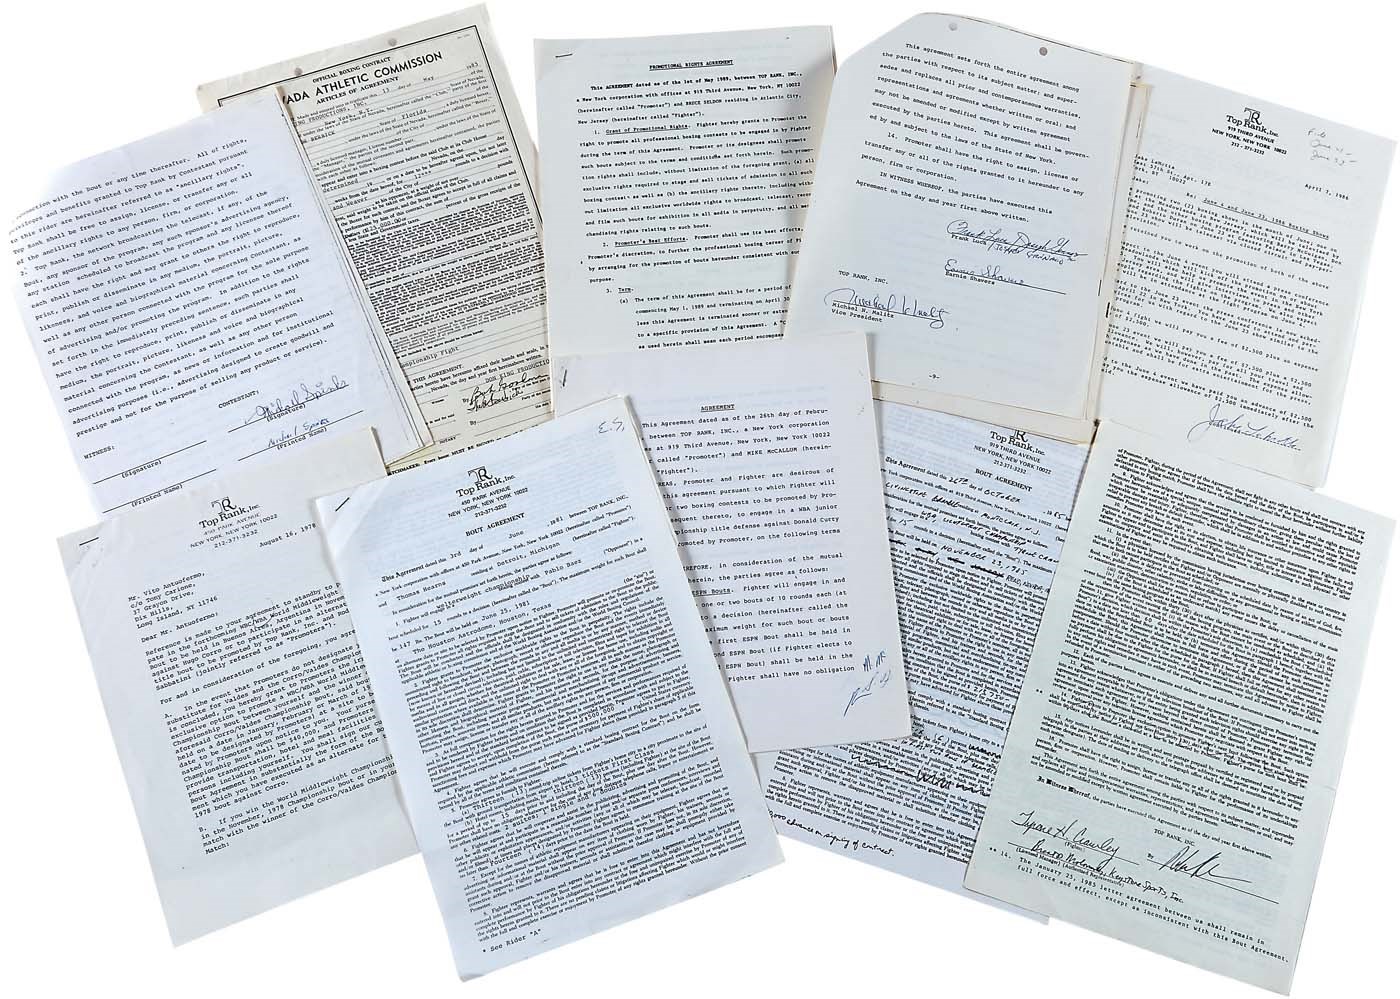 Muhammad Ali & Boxing - Boxing Signed Contract Lot of 10